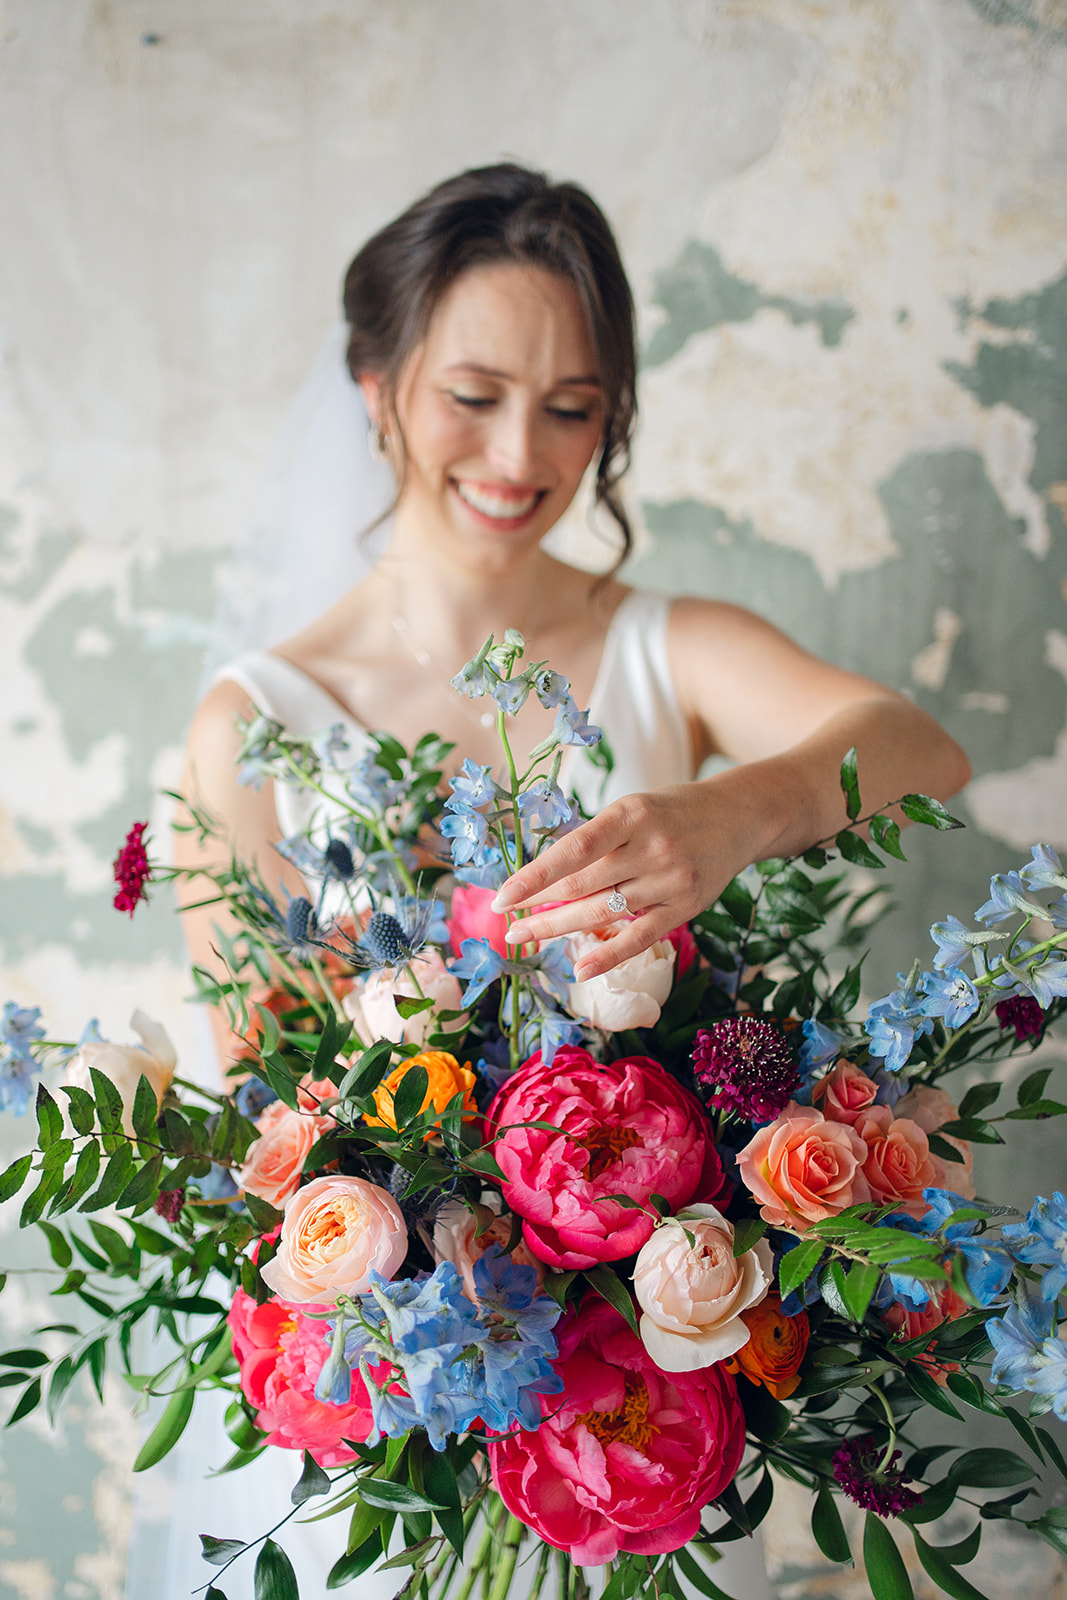 A bride smiles while showing off her colorful bright bouquet